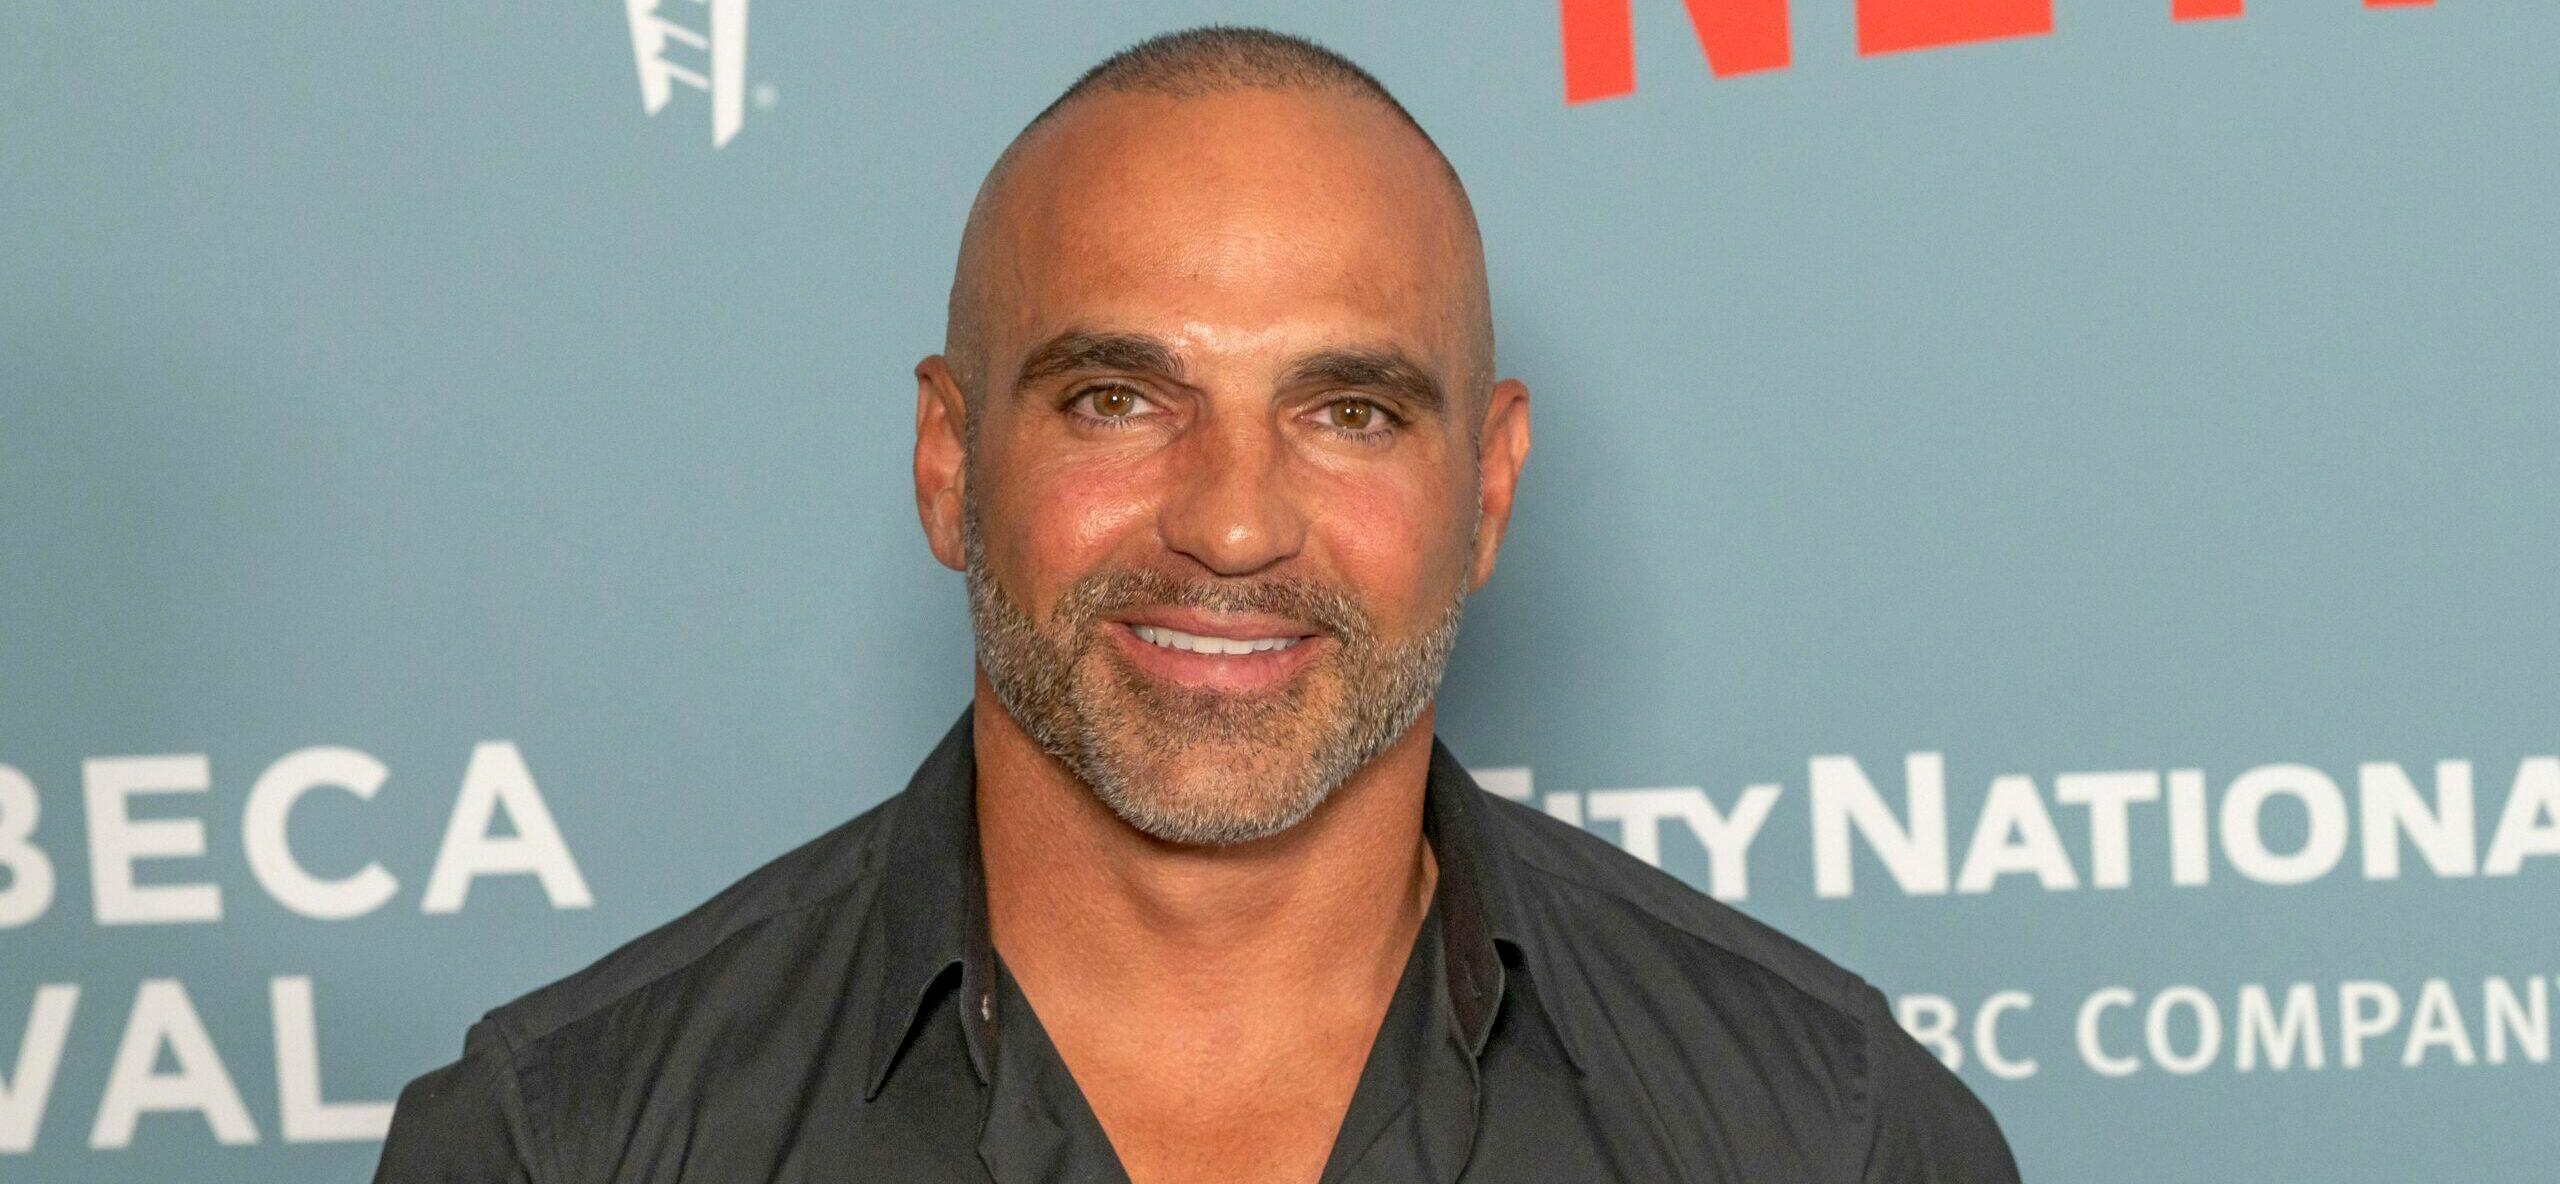 Joe Gorga attends the "Halftime" Premiere during the Tribeca Film Festival Opening Night at United Palace on June 08 2022 in New York City.